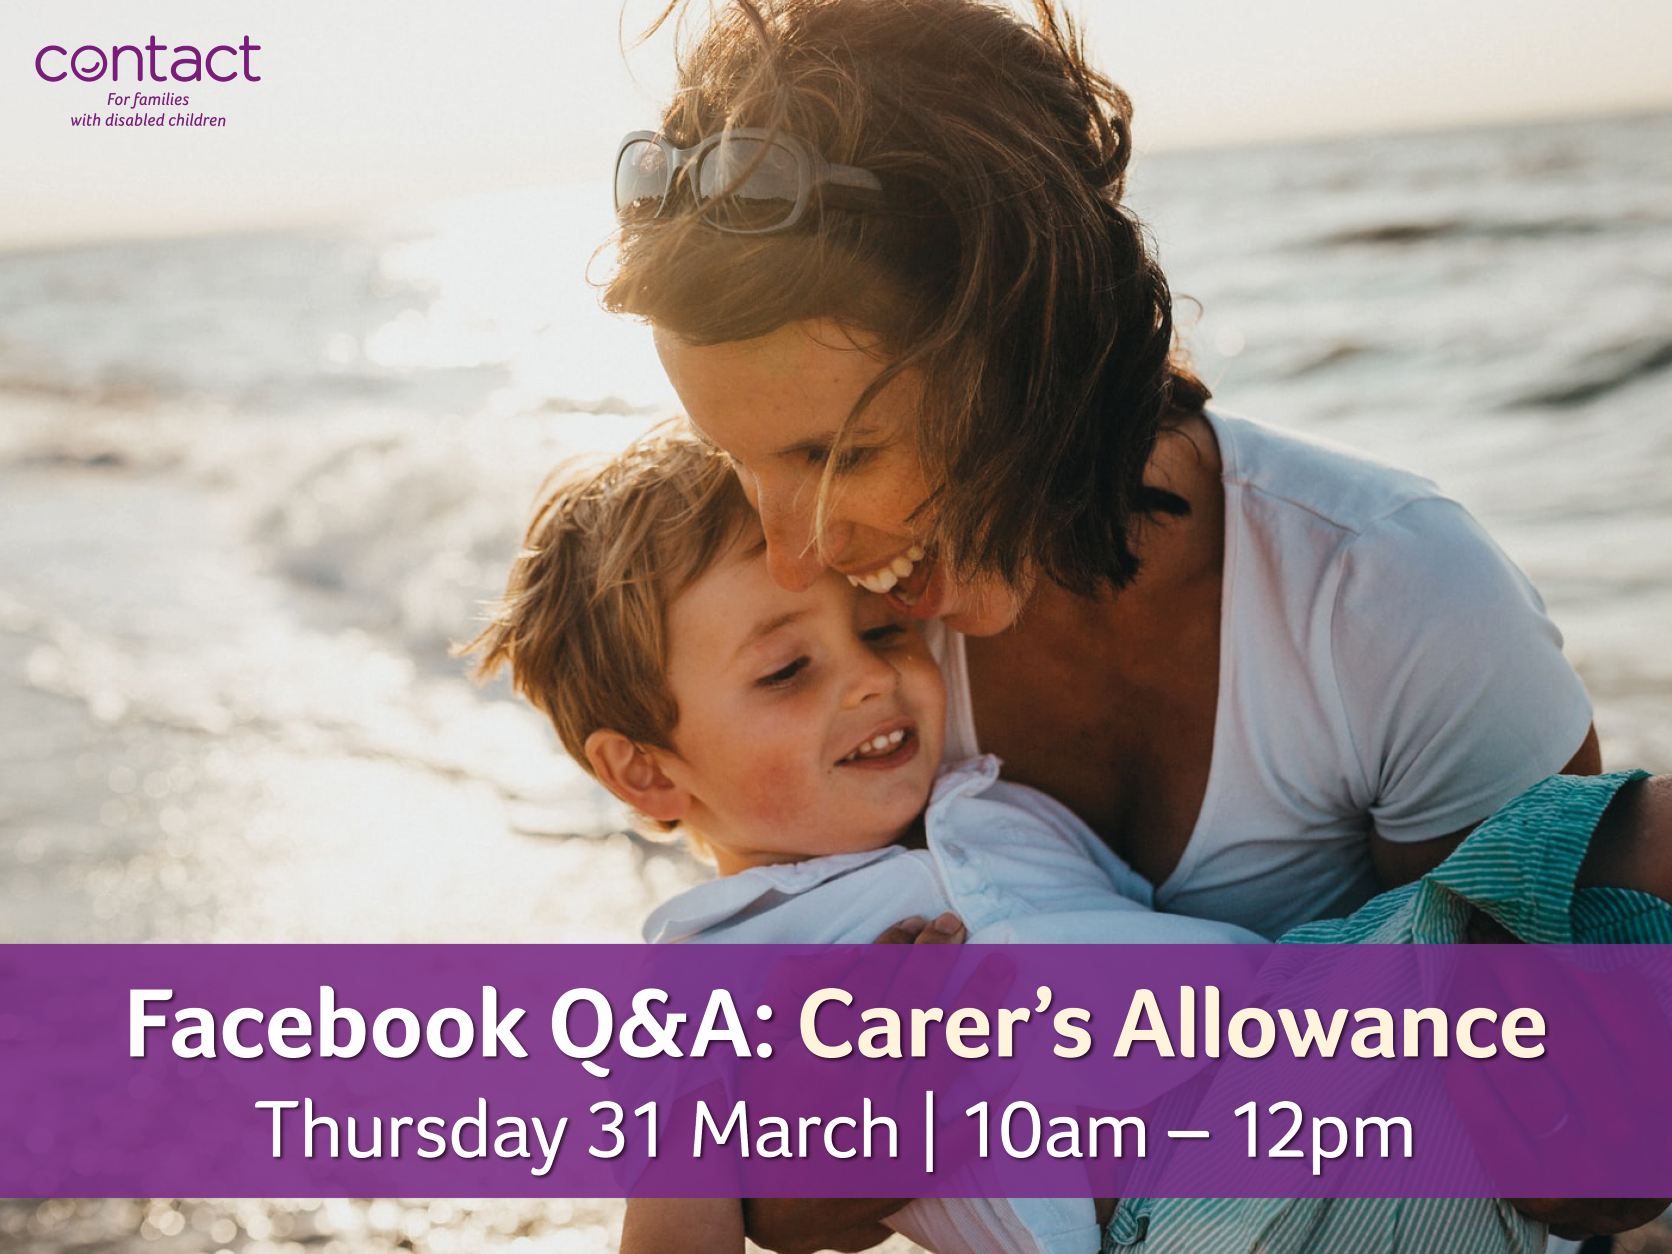 Photo of mum and child with banner saying:Facebook Q&A Carer's Allowance, Thursday 31 March 10am-12pm